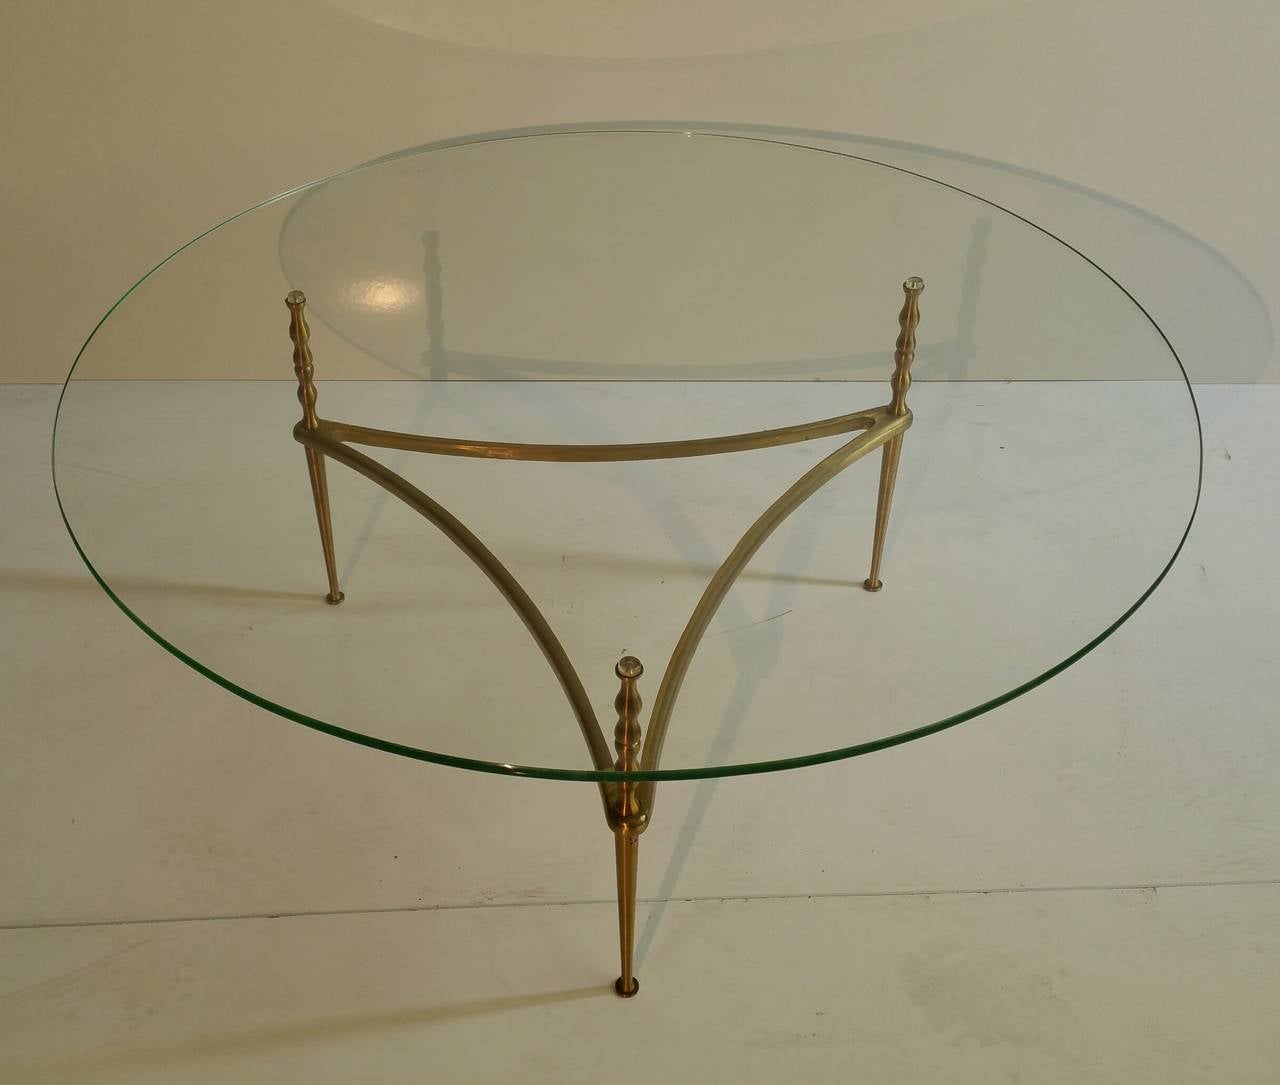 20th Century Modernist Italian Glass and Brass Coffee Table, Manner of Gio Ponti